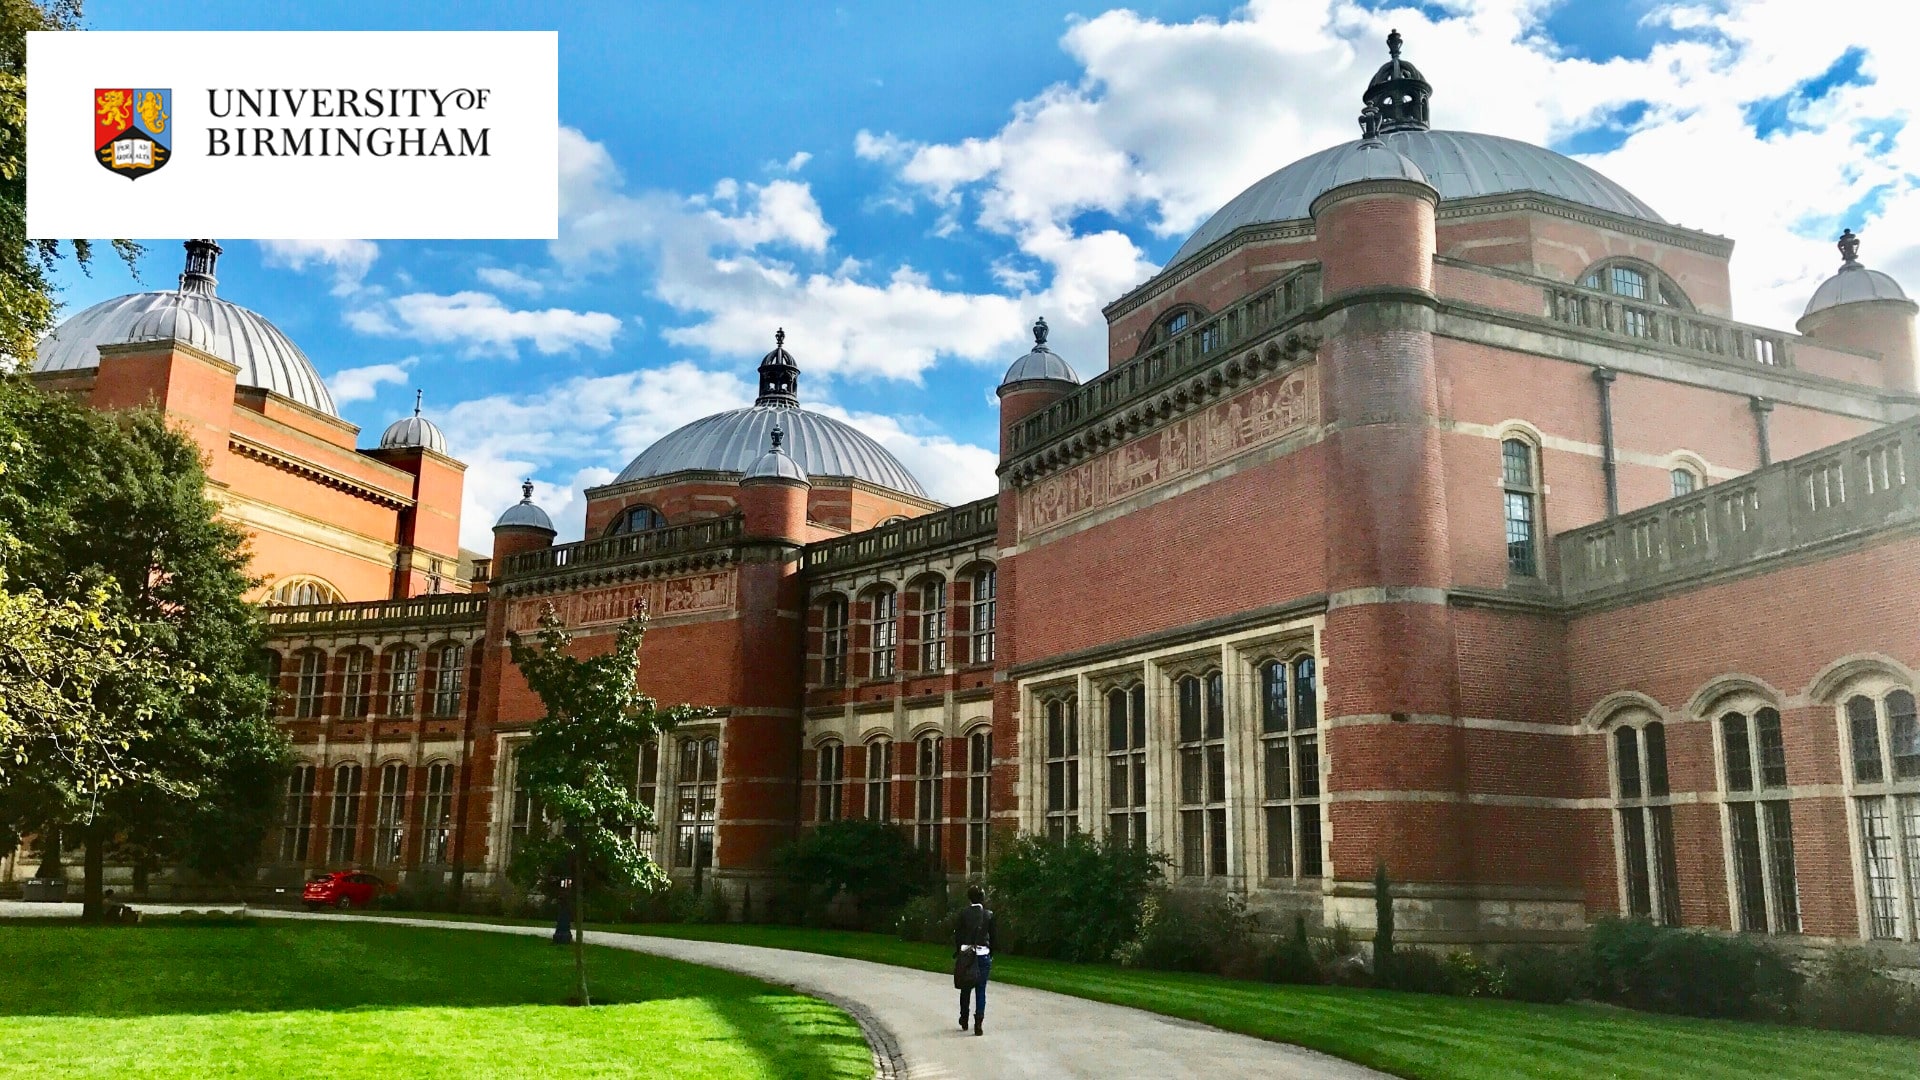 The University of Birmingham's Aston Webb building against a blue sky with white clouds.